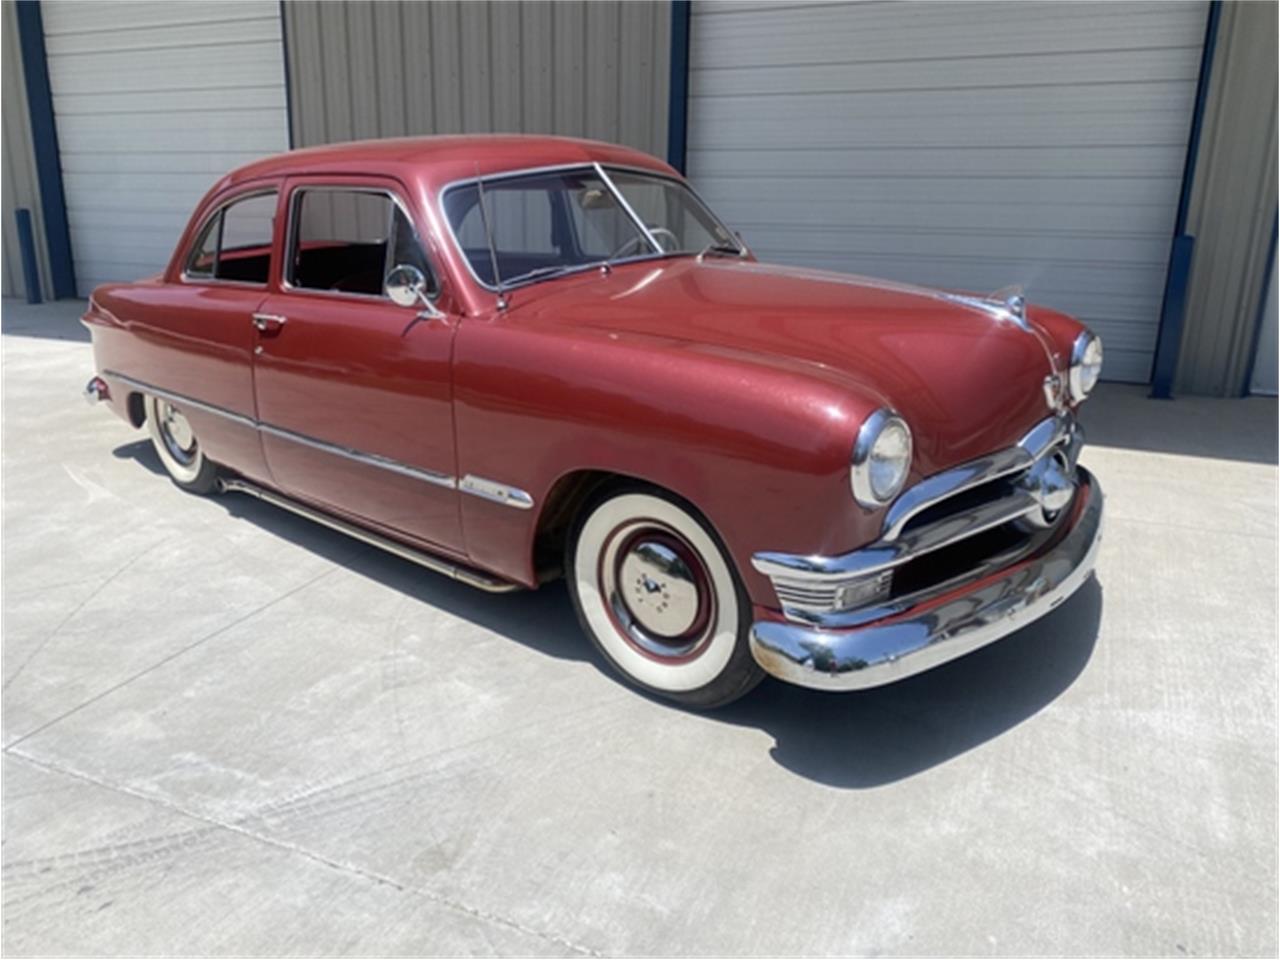 For Sale at Auction: 1950 Ford Custom in Shawnee, Oklahoma for sale in Shawnee, OK